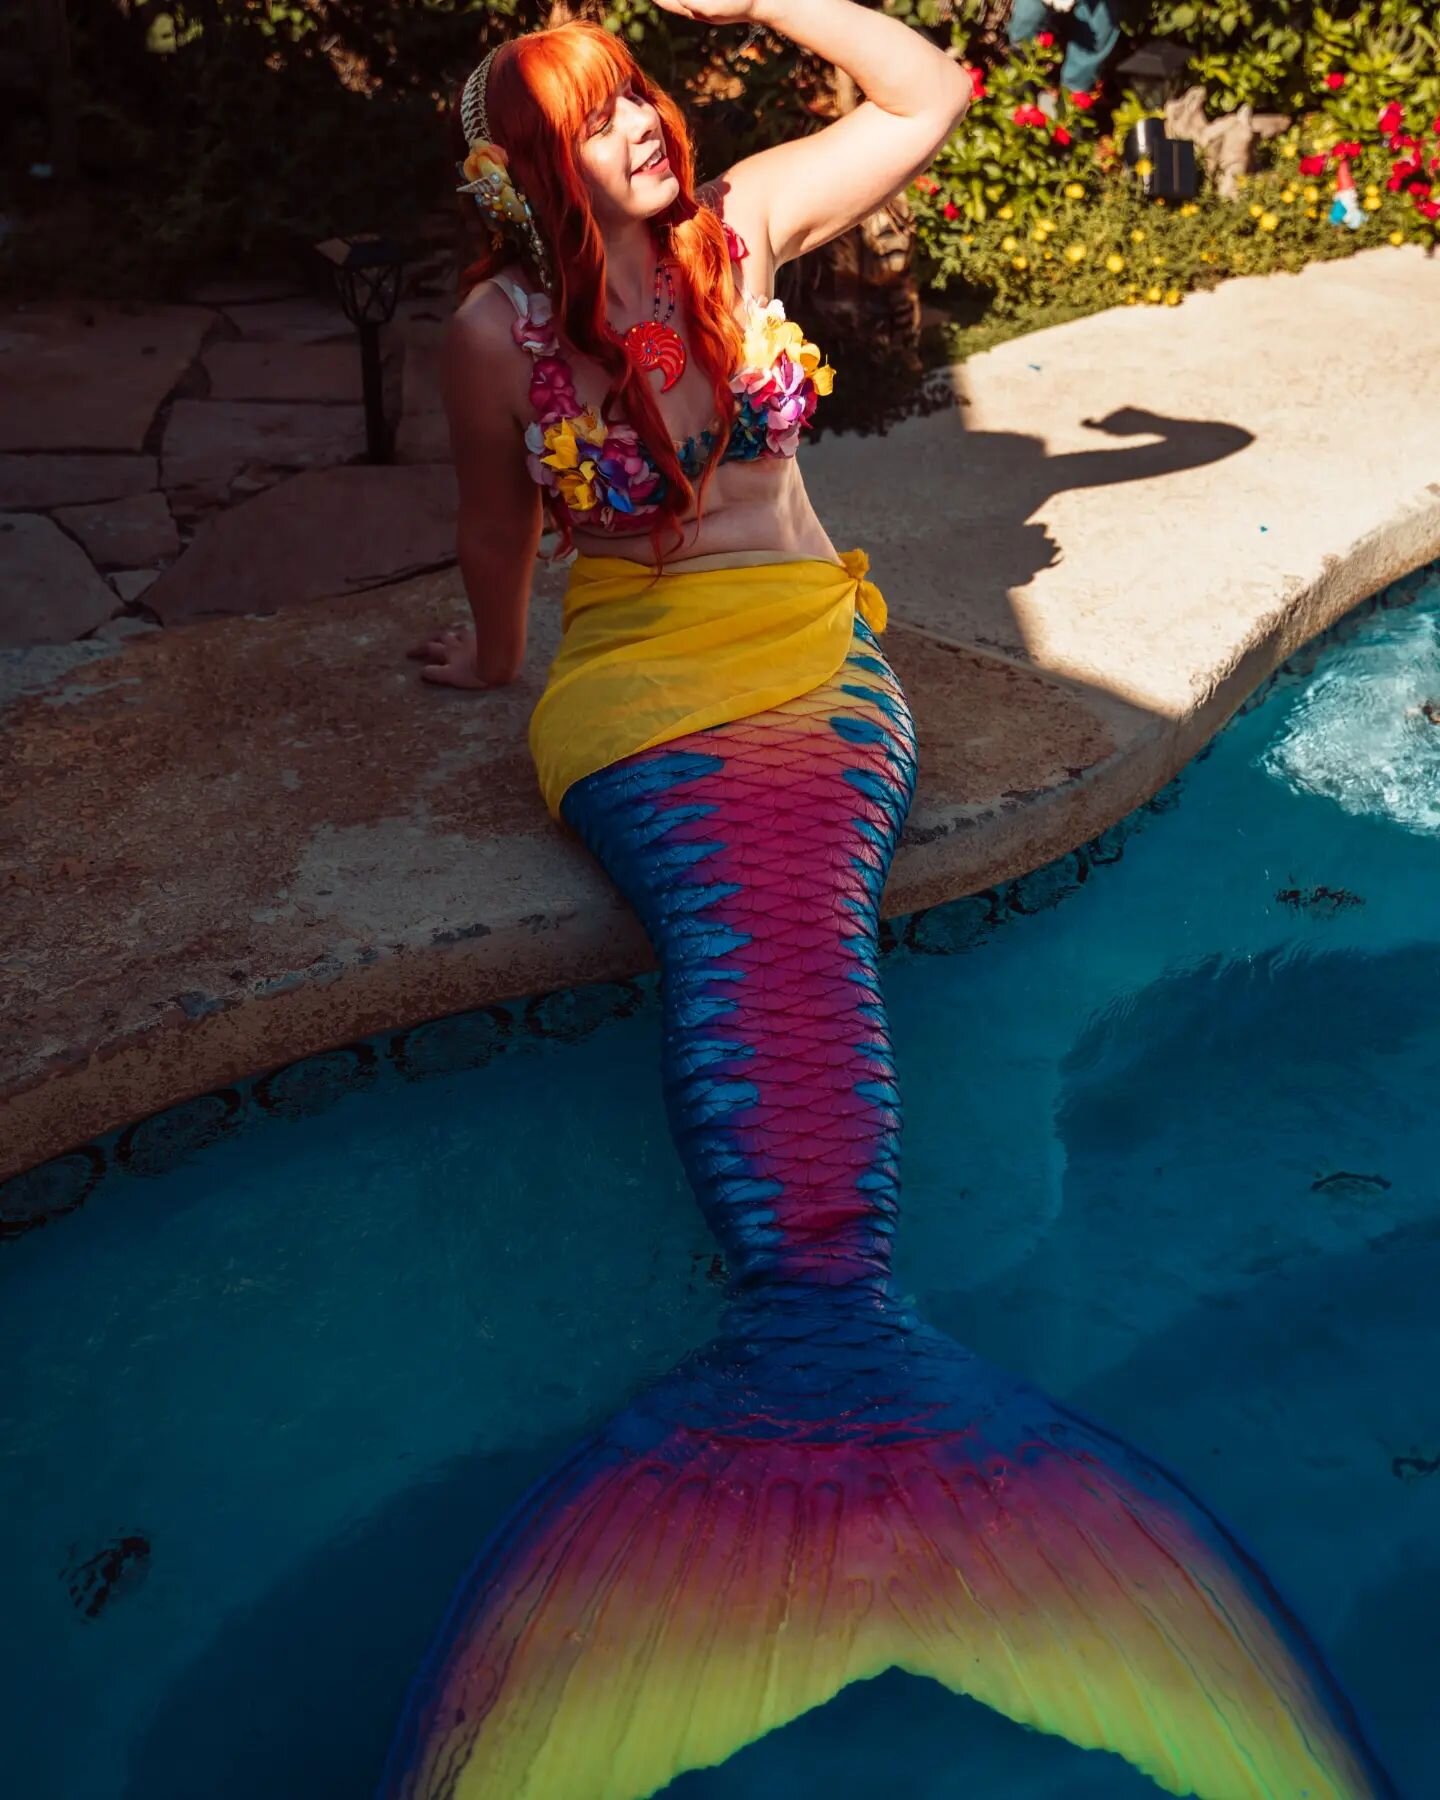 A little mermaid magic for you on this #splashsaturday! 

If you want to see the land version of this look check out @moonglowcosplay.

Thanks again @azphotomeetups for hosting! 

📸: @billy.taylor.visuals
Tail: @mertailor

#mermaid #mermaidtail
#mer